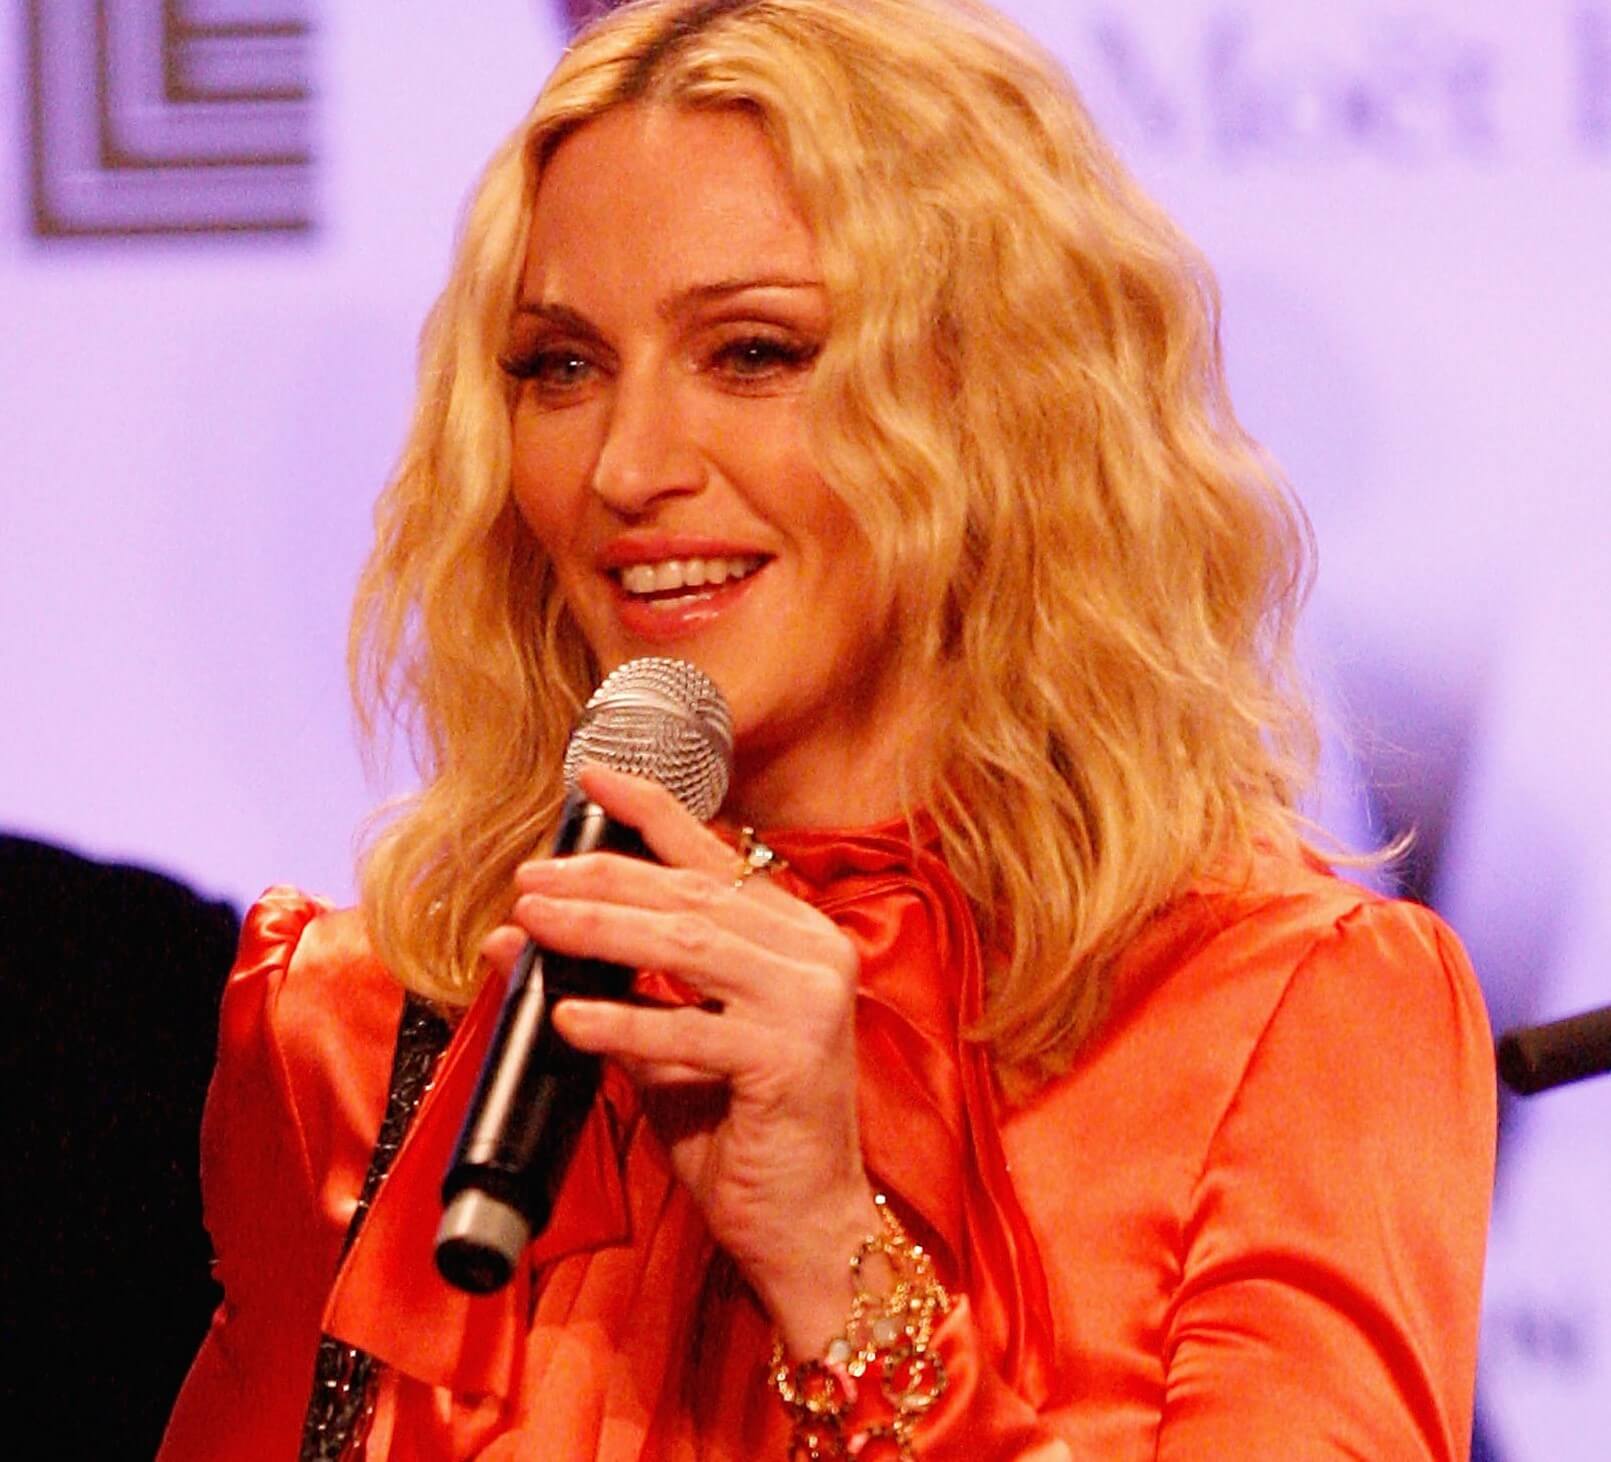 "Into the Groove" singer Madonna wearing pink